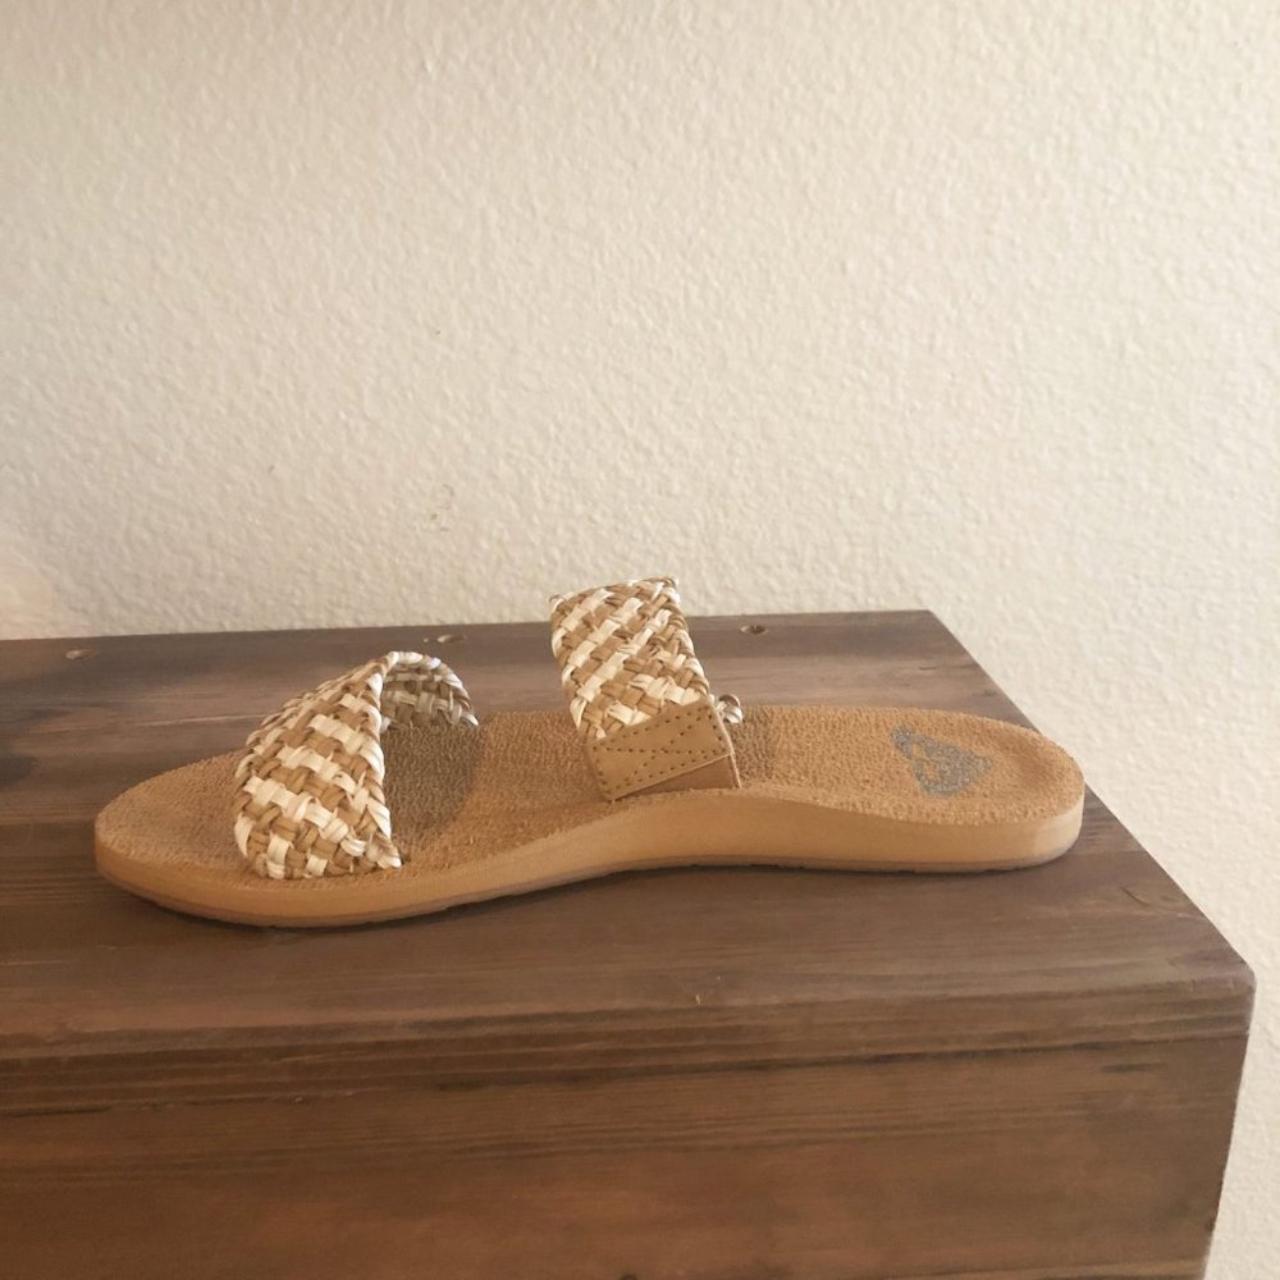 Roxy Porto Slide Sandals Travel in style and comfort - Depop